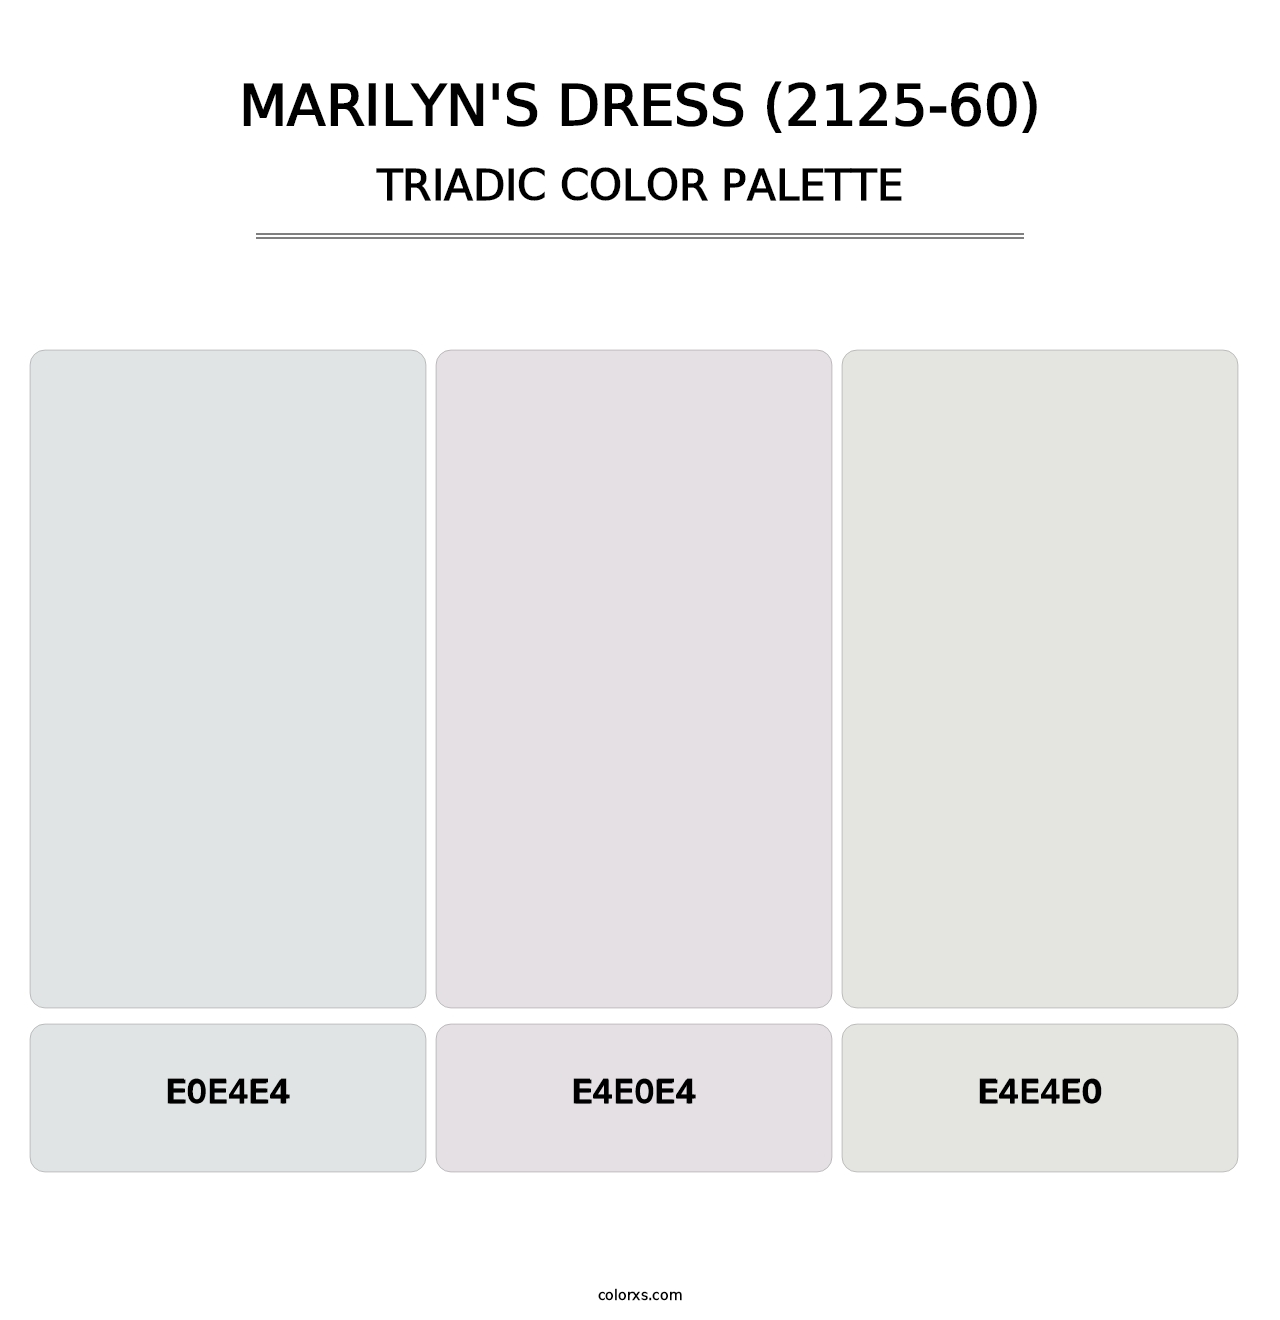 Marilyn's Dress (2125-60) - Triadic Color Palette